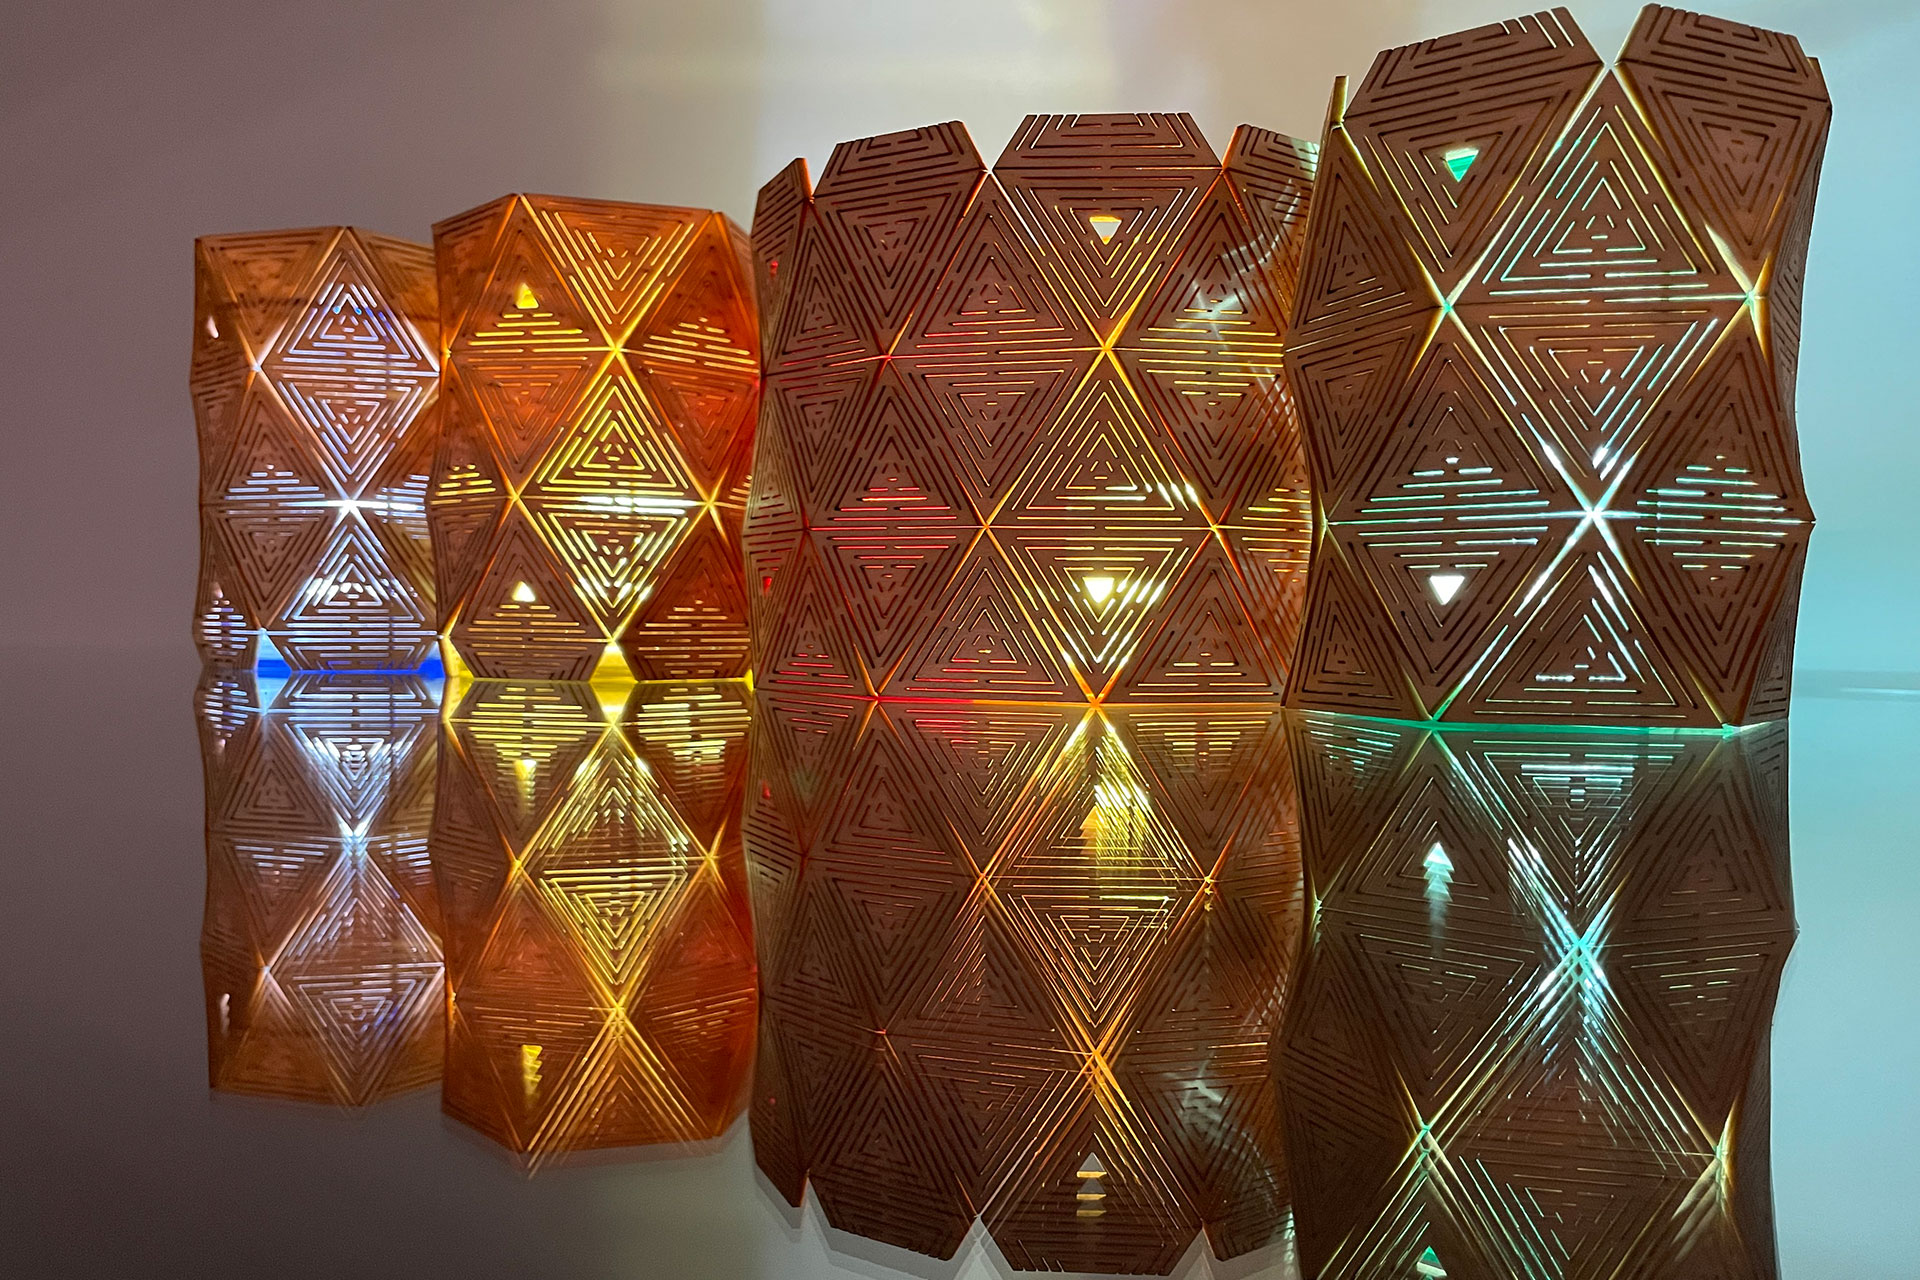 Laser cut lights in multiple colors with reflections on glass